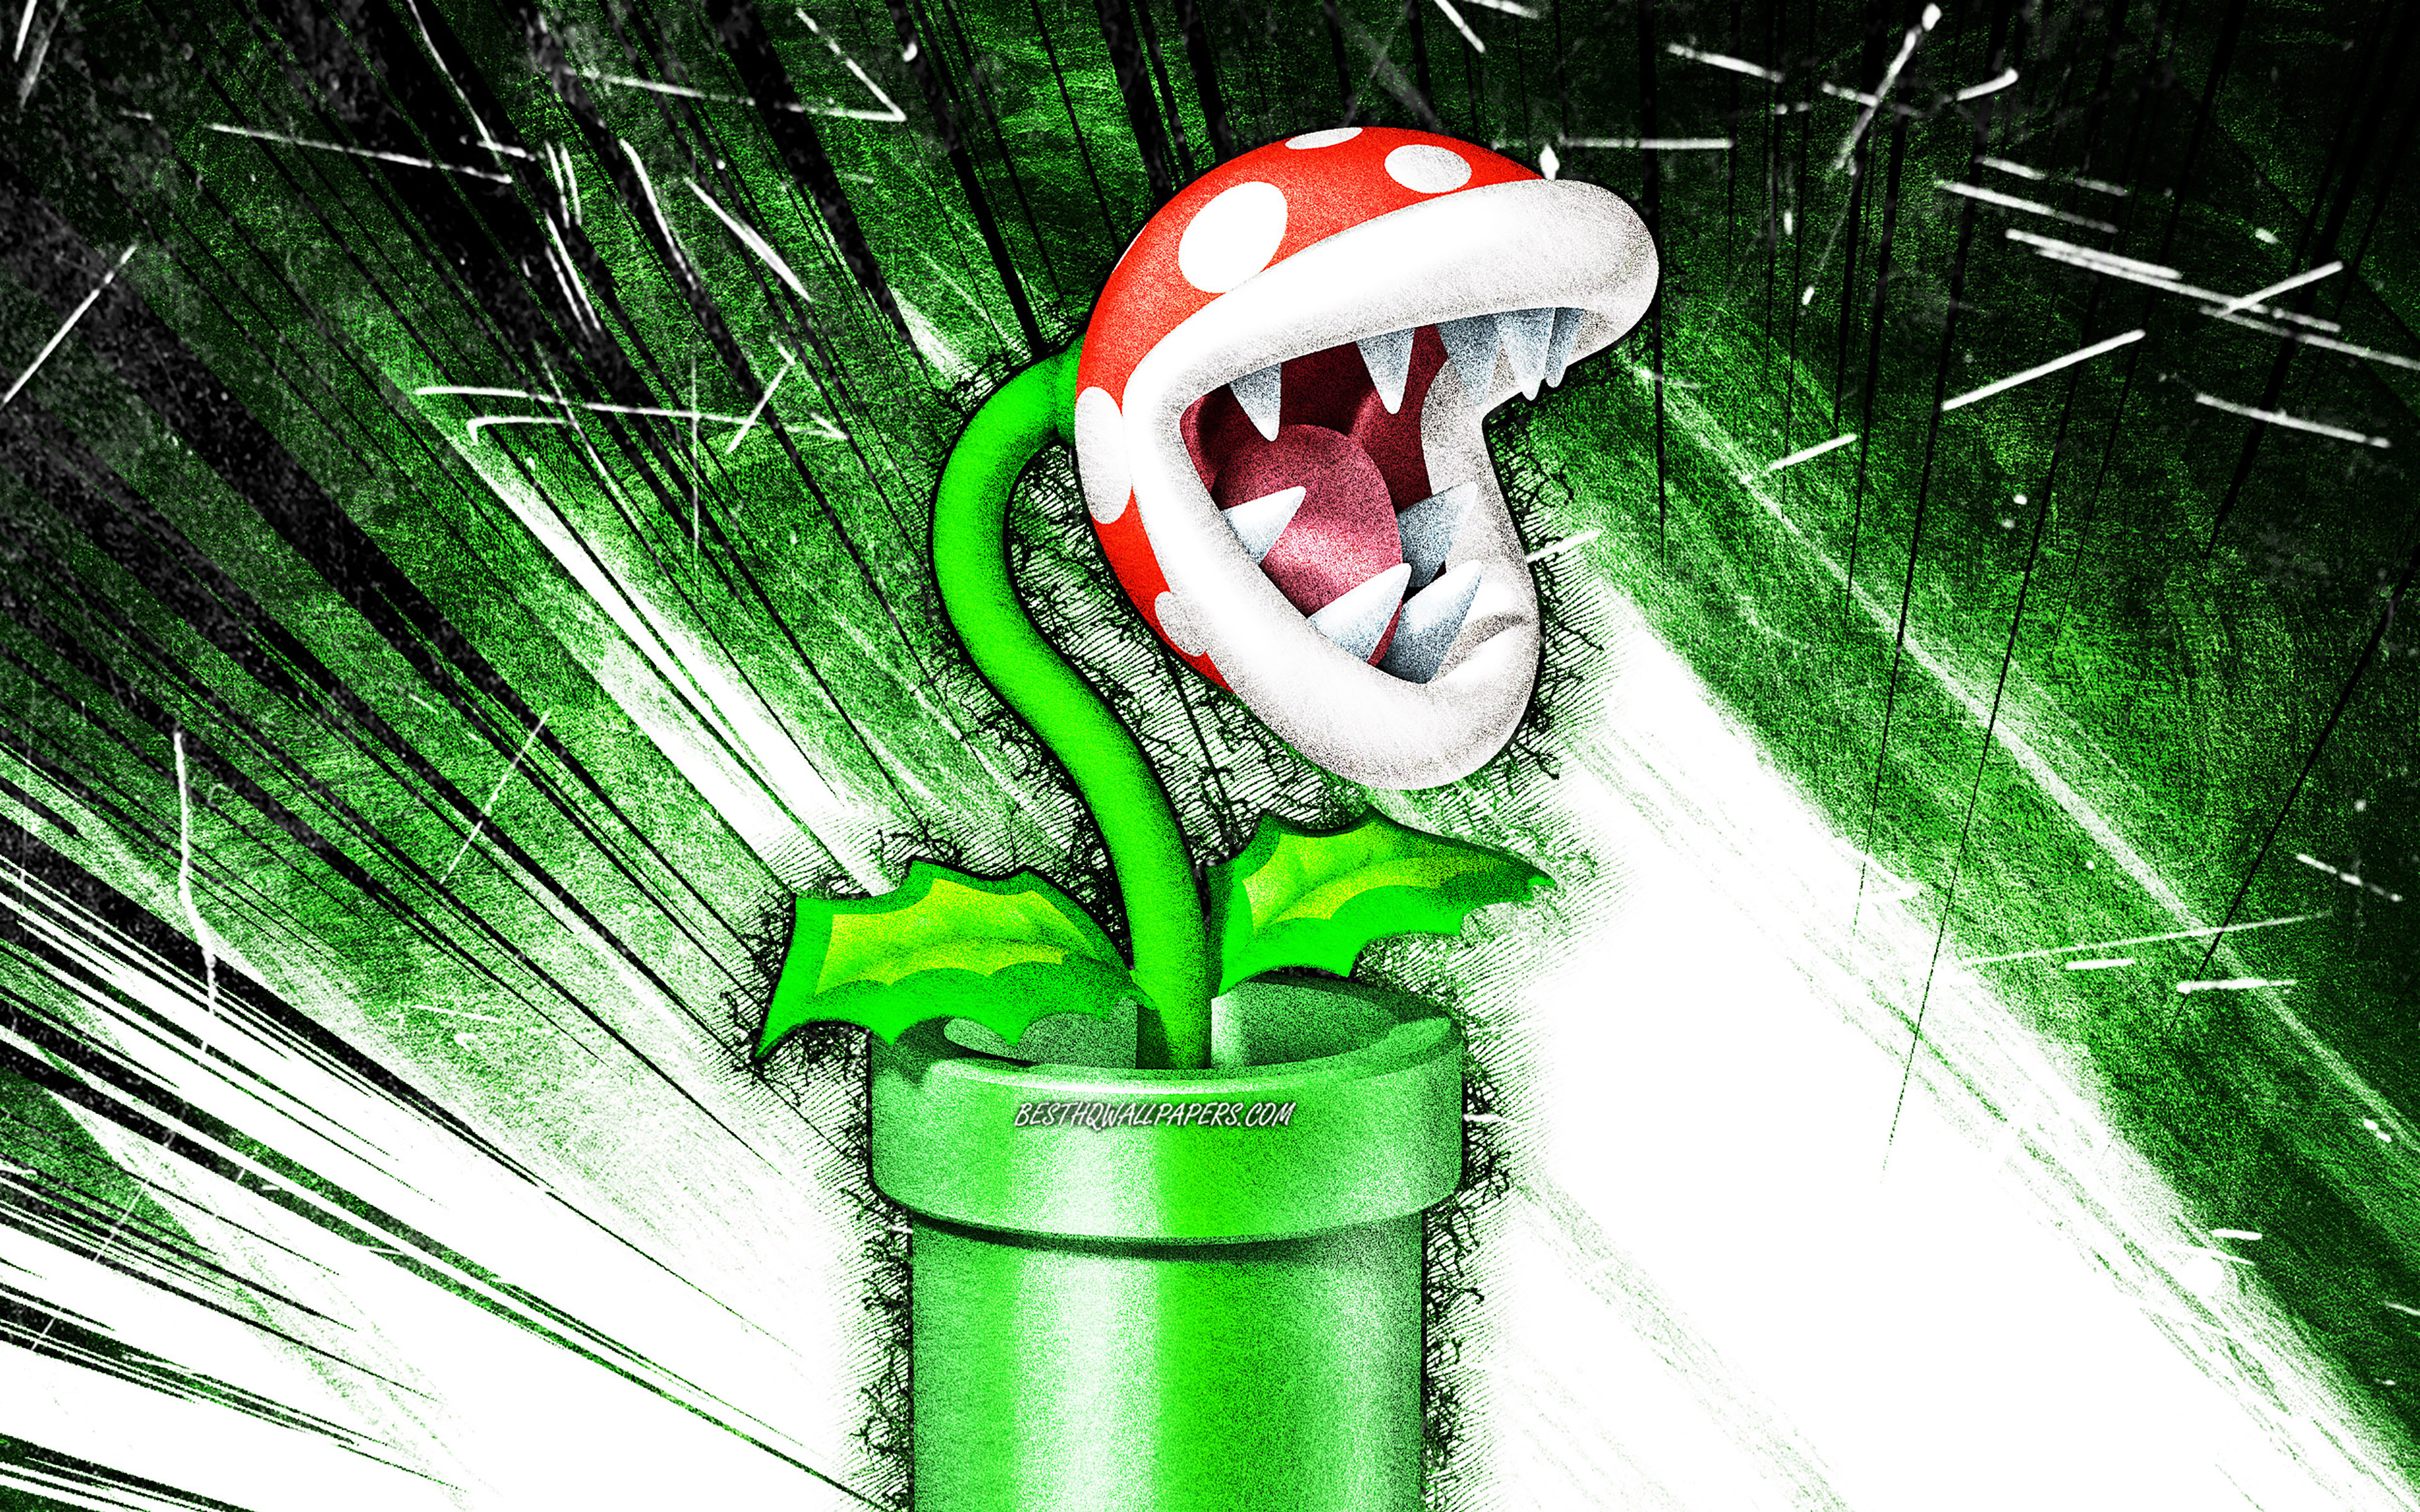 Download wallpaper 4k, Piranha Plant, grunge art, Super Mario, cartoon plant, green abstract rays, Super Mario characters, Super Mario Bros, Piranha Plant Super Mario for desktop with resolution 3840x2400. High Quality HD